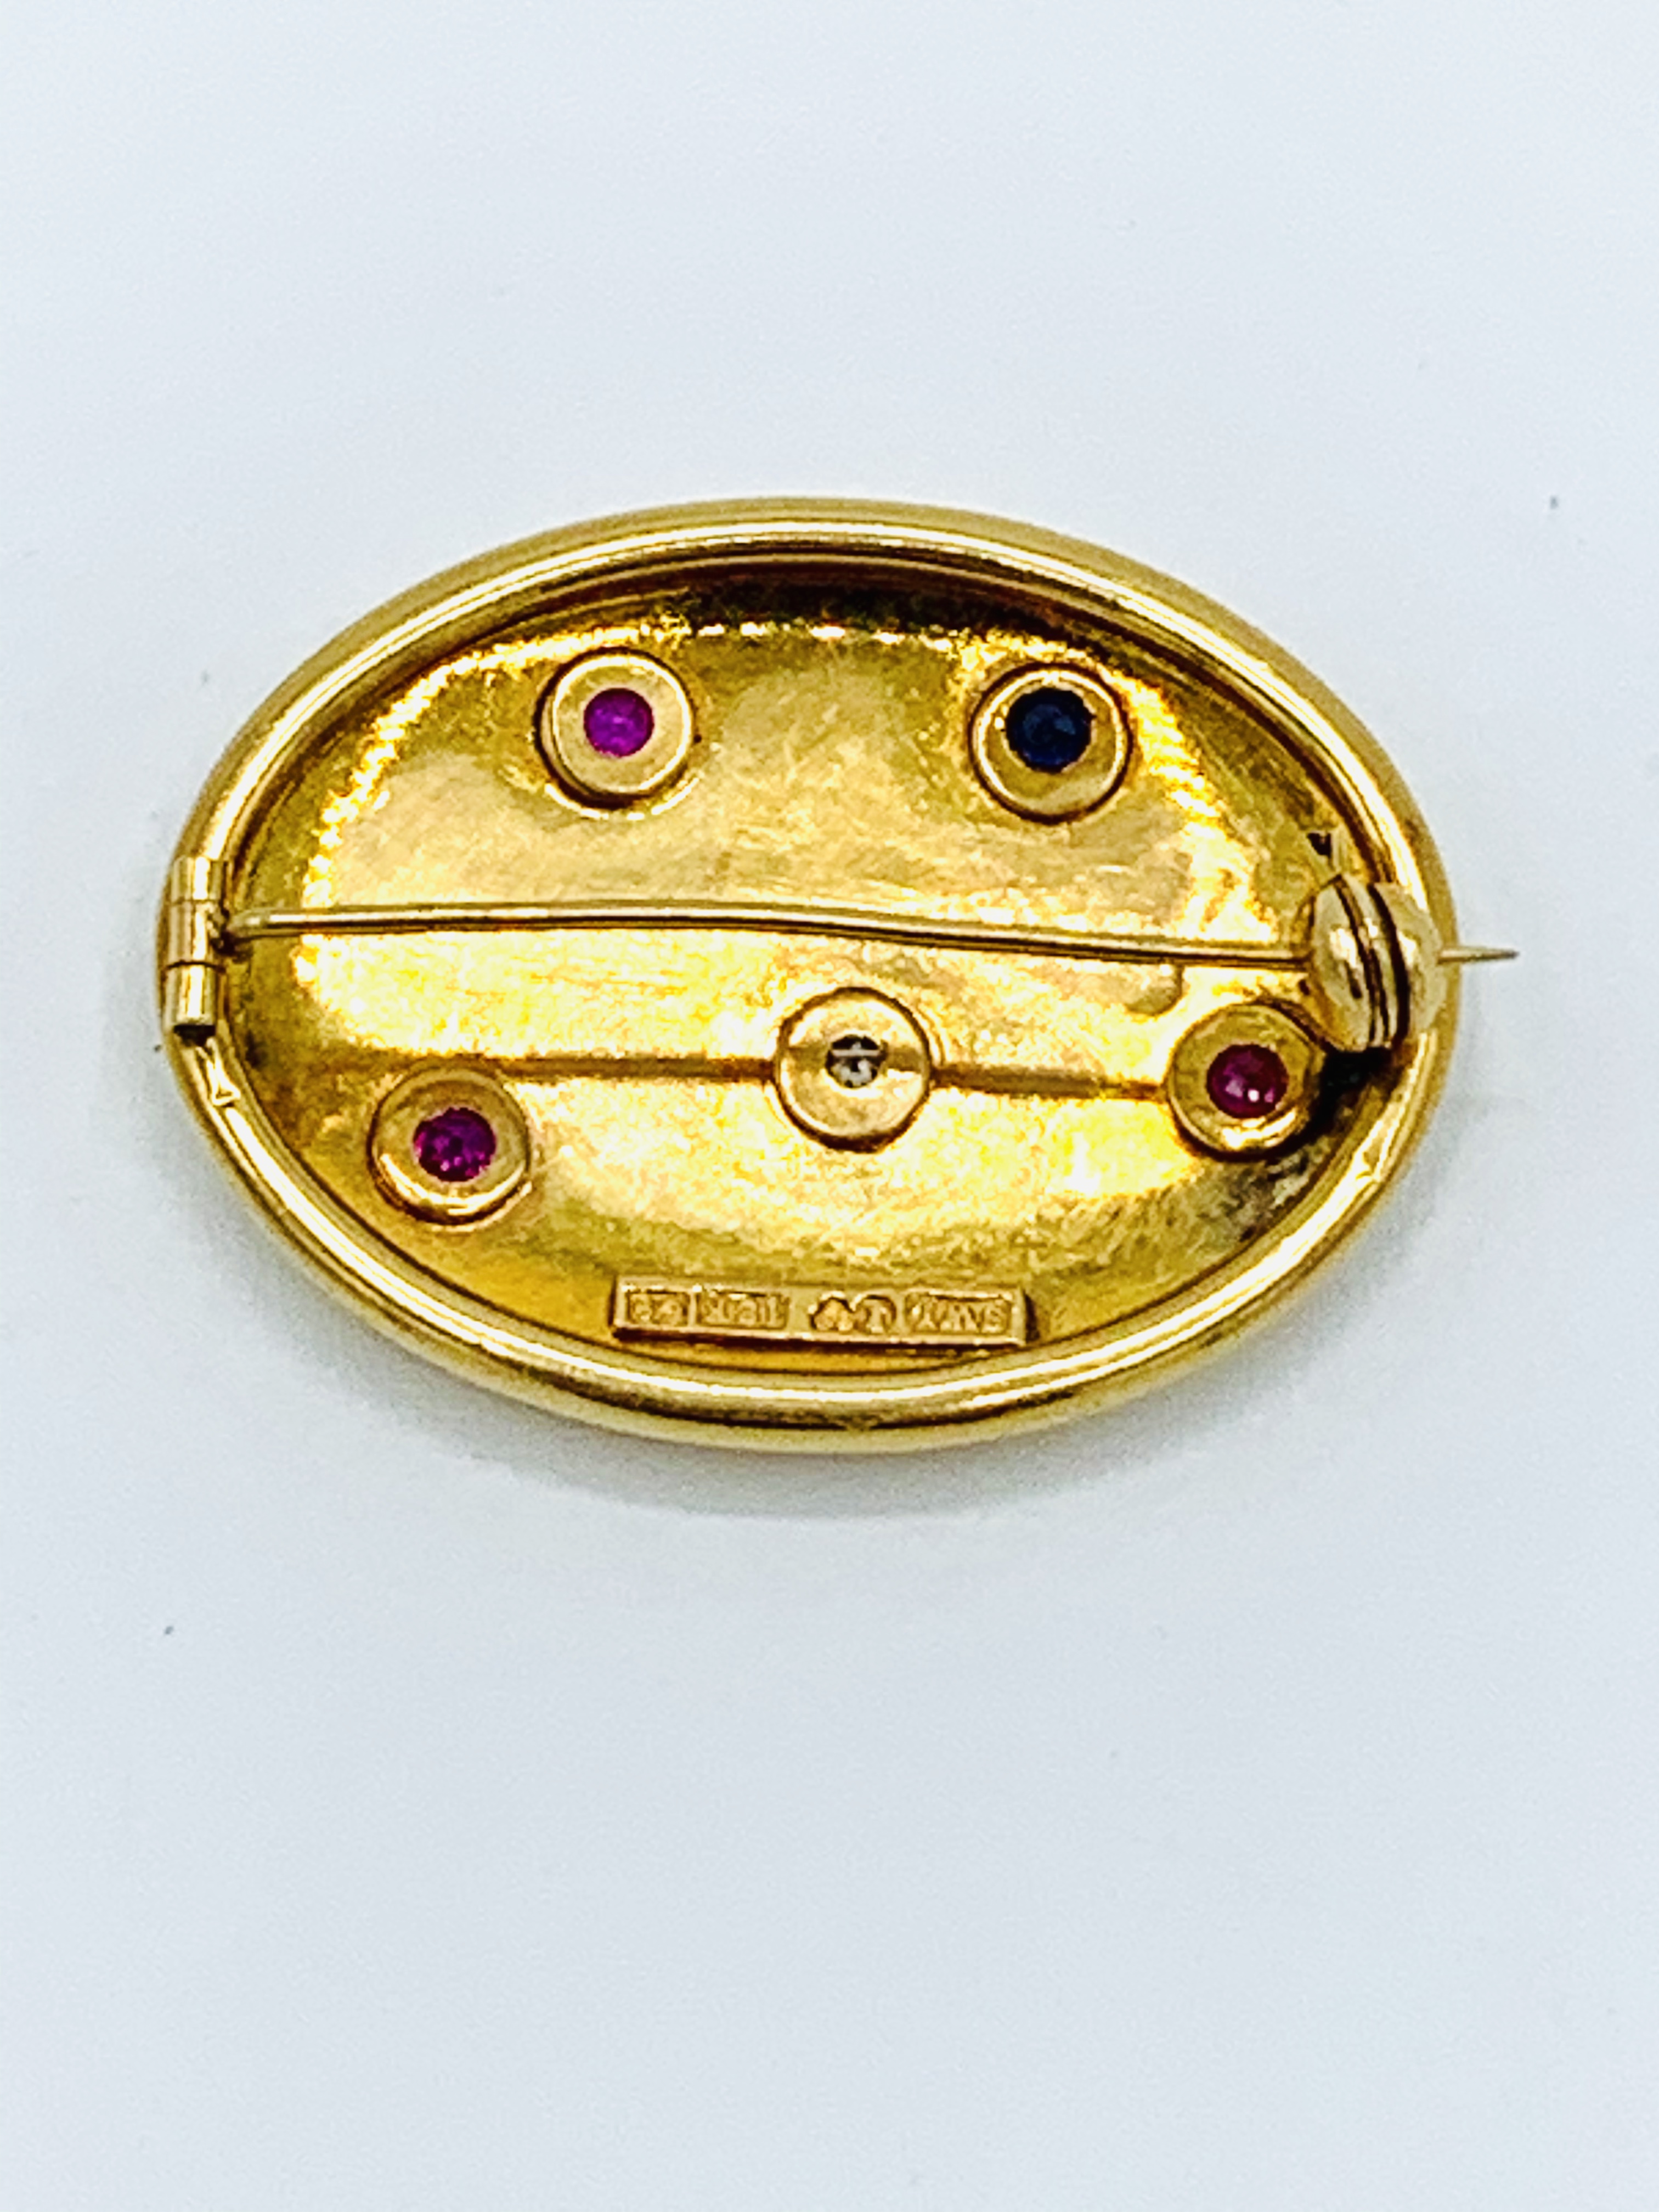 18k gold oval brooch decorated with red, blue and white stones. - Image 3 of 5